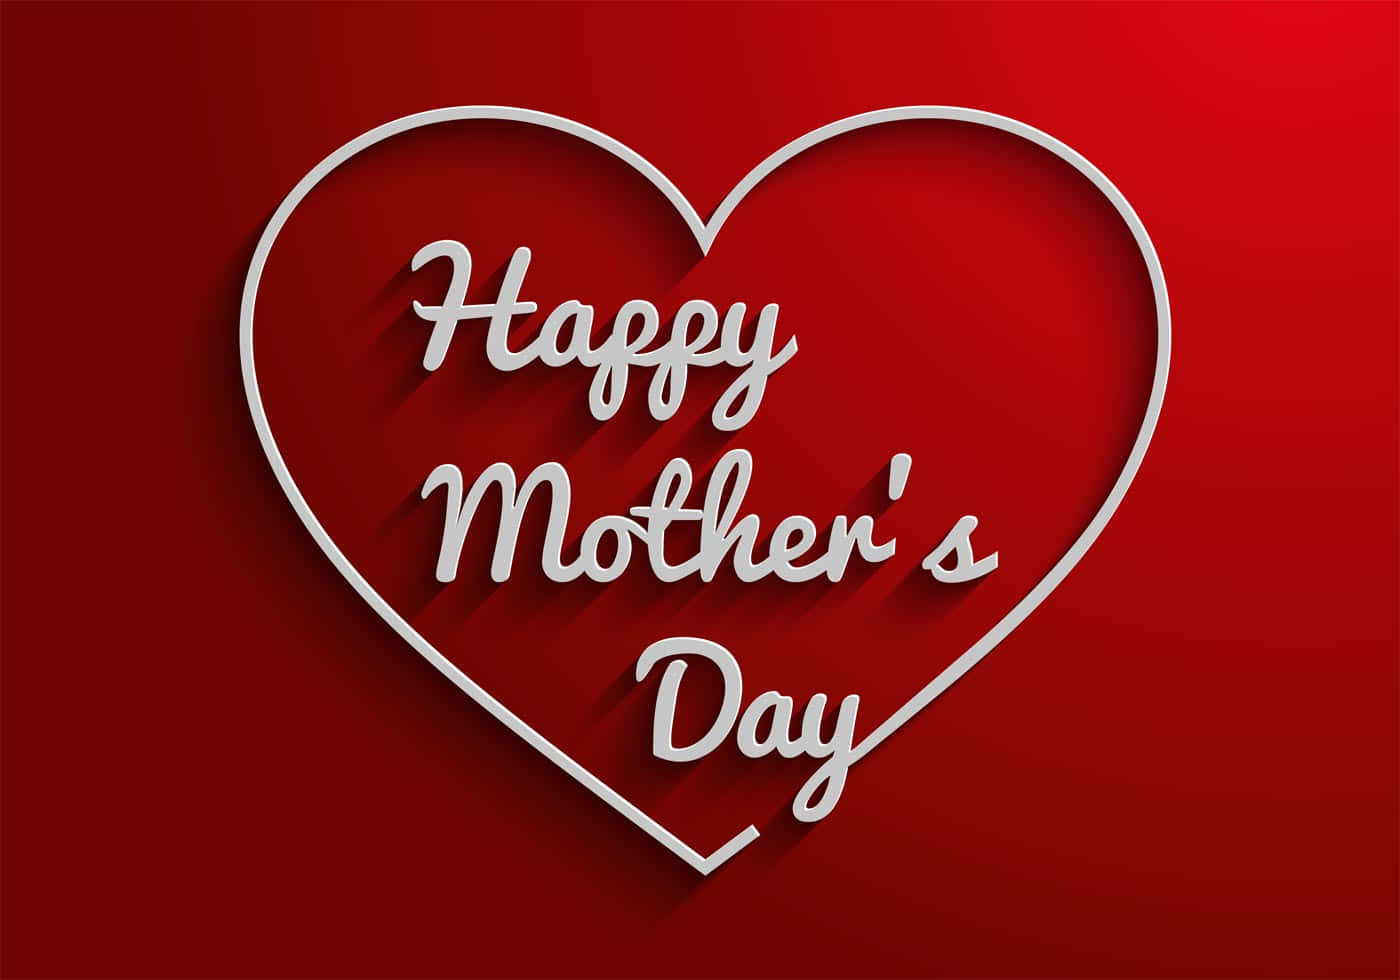 Happy Mother's Day Greeting Card With A Heart Shape On Red Background